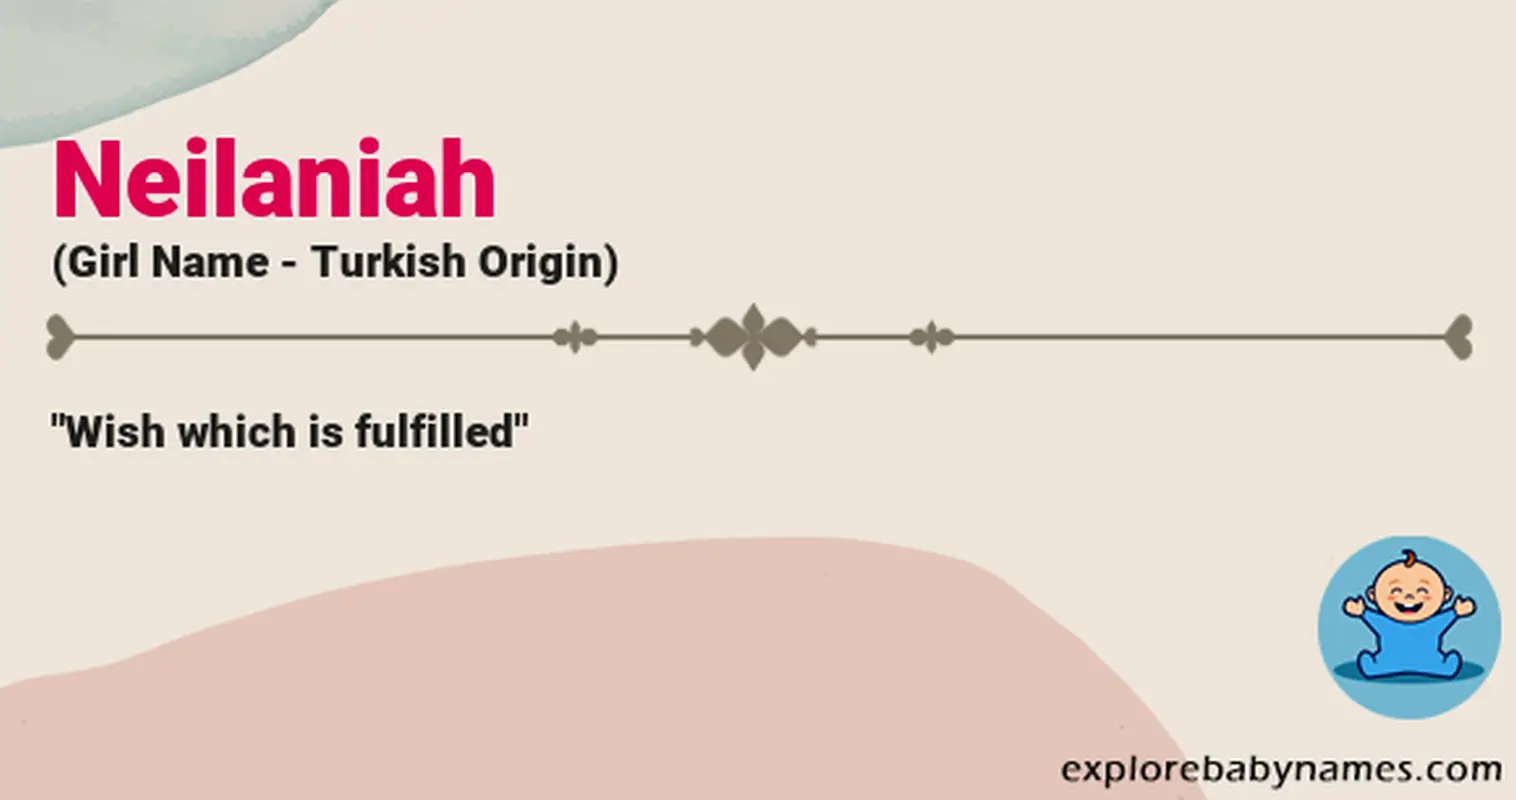 Meaning of Neilaniah